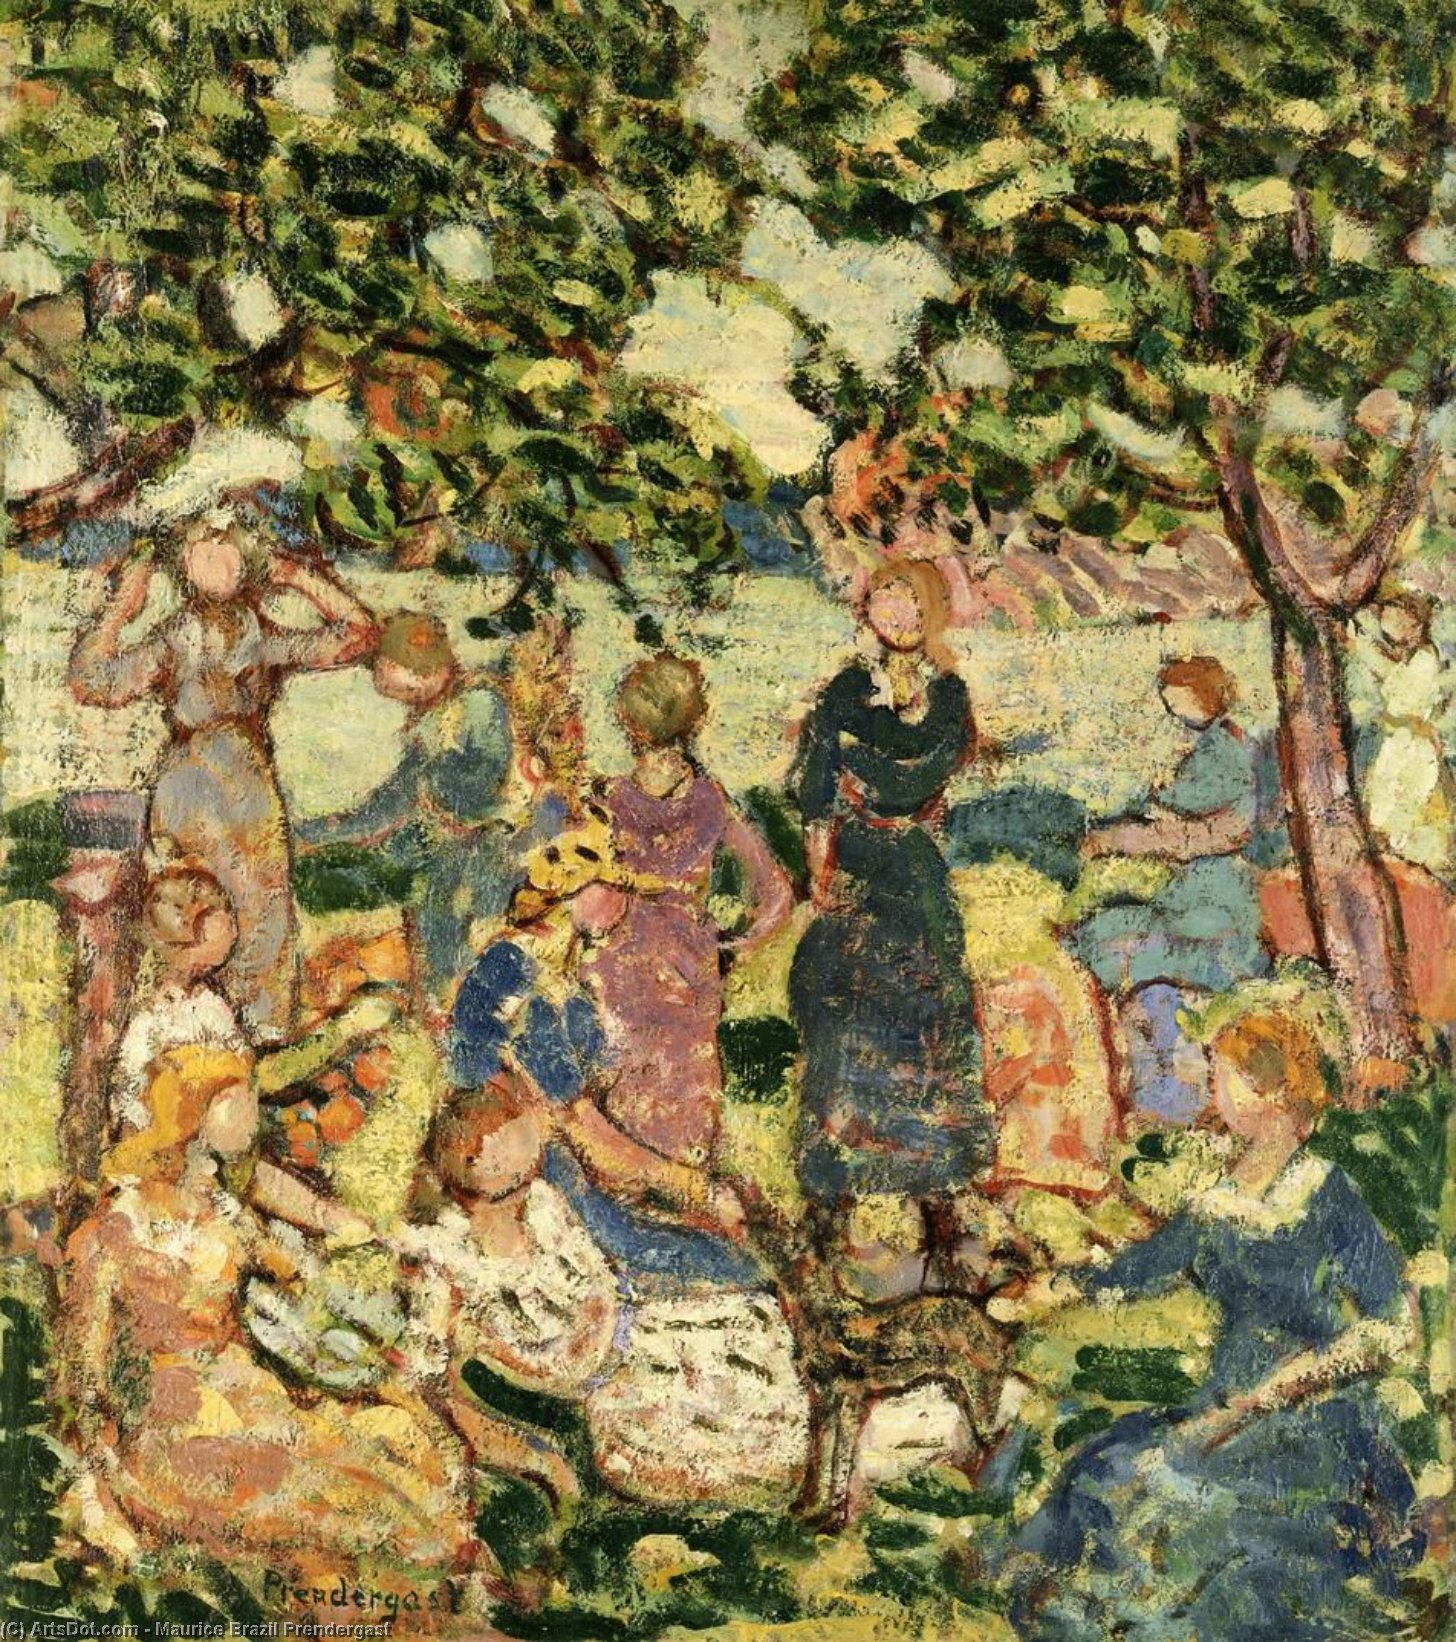 WikiOO.org - 백과 사전 - 회화, 삽화 Maurice Brazil Prendergast - Picnic by the Inlet